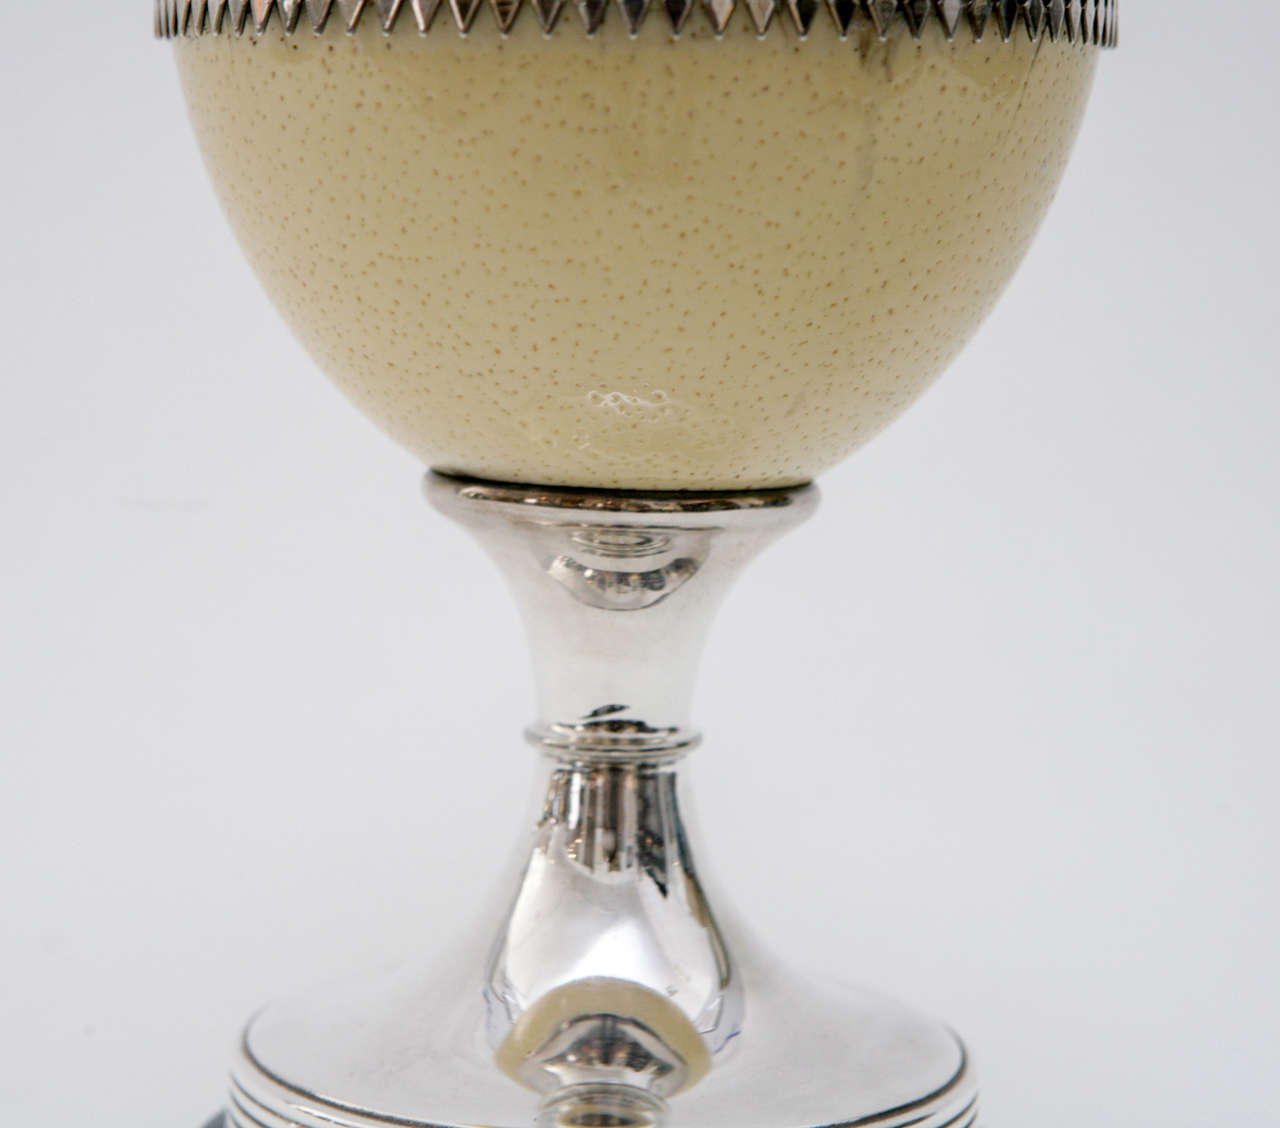 Ostrich Eggshell Footed Ostrich Egg Box by Antony Redmile